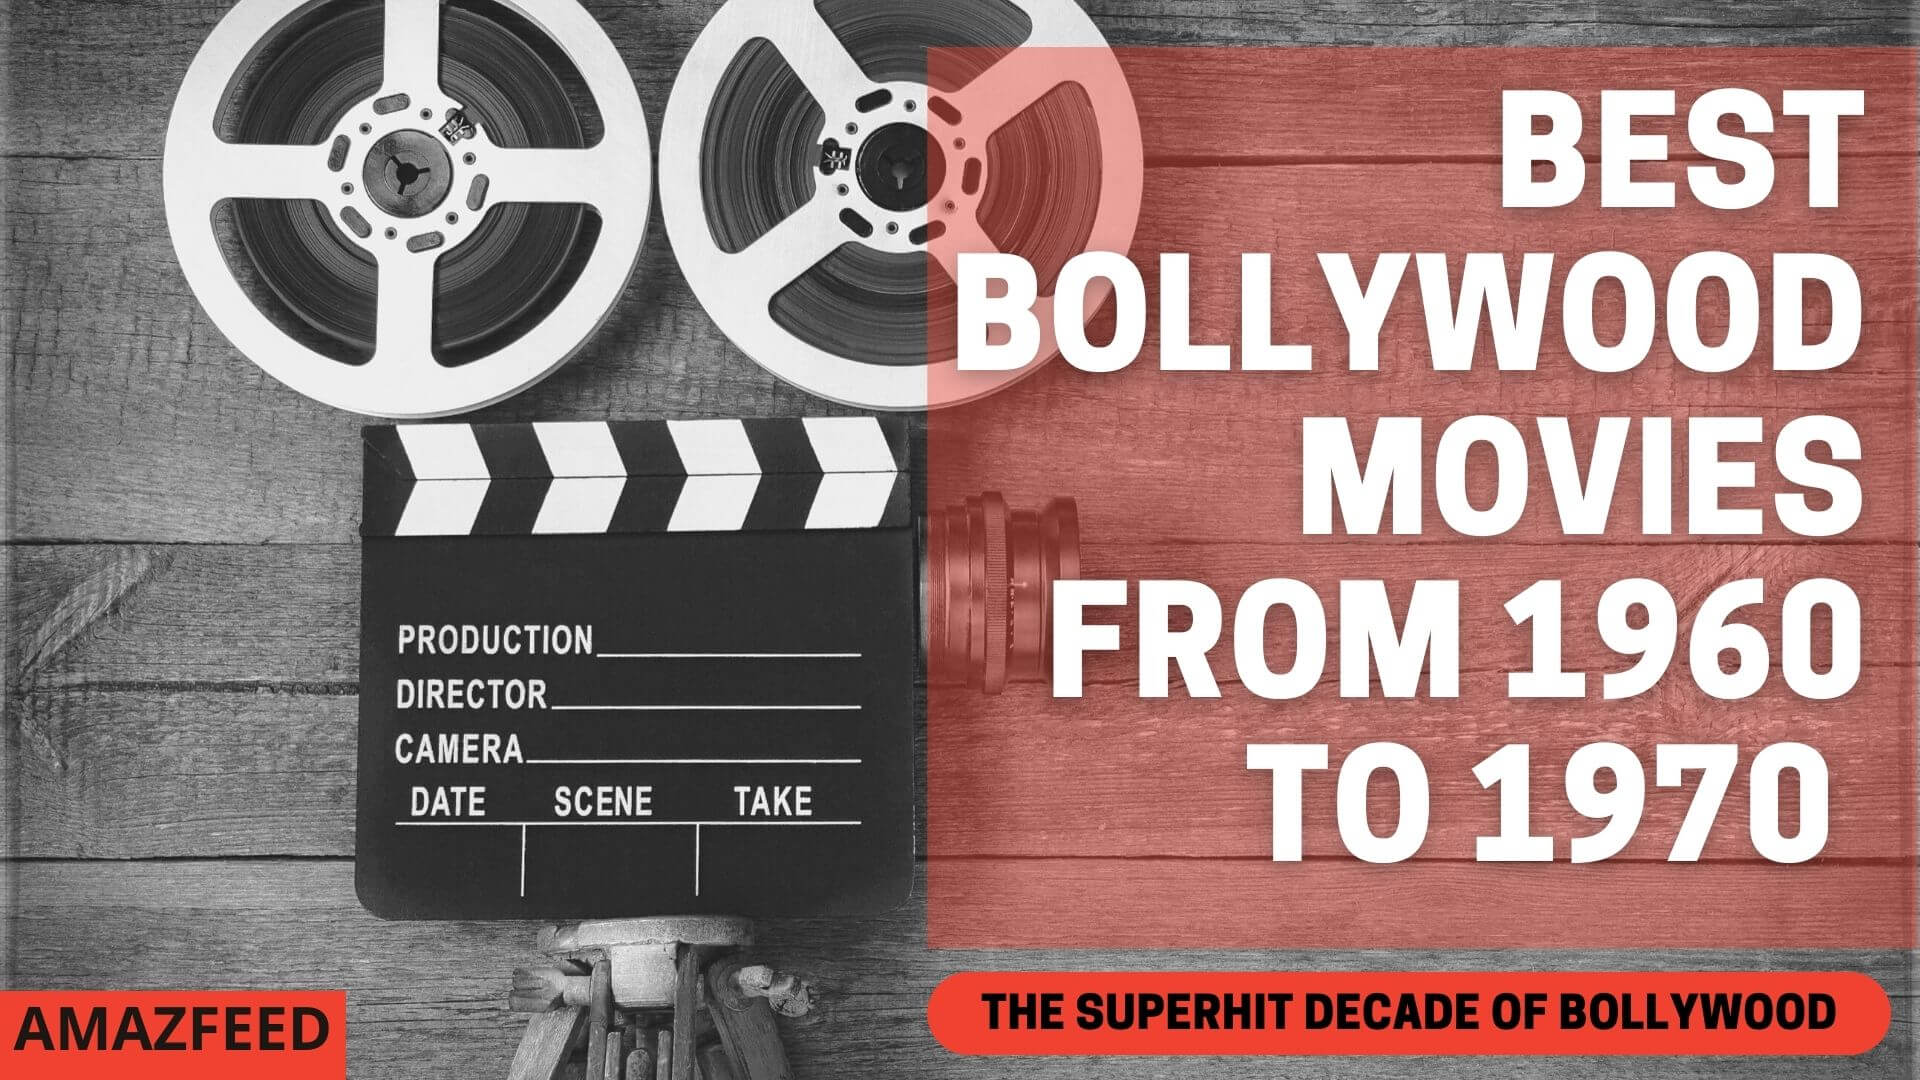 Evergreen Bollywood movies from 1950 to 1960_ the golden era of Bollywood